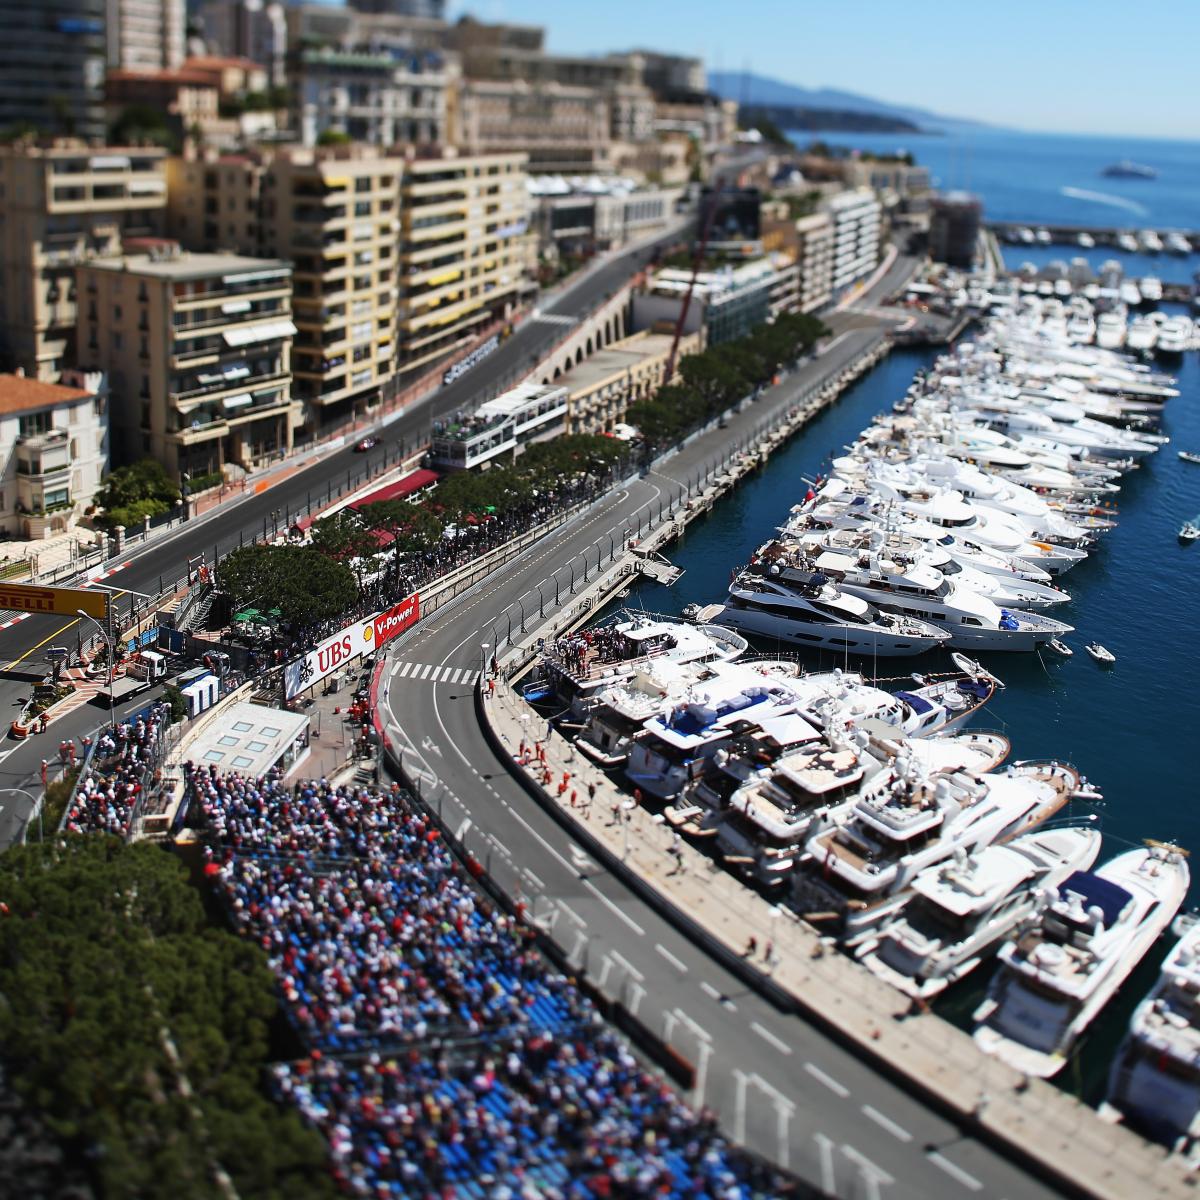 5 Things To Do At The Monaco Grand Prix